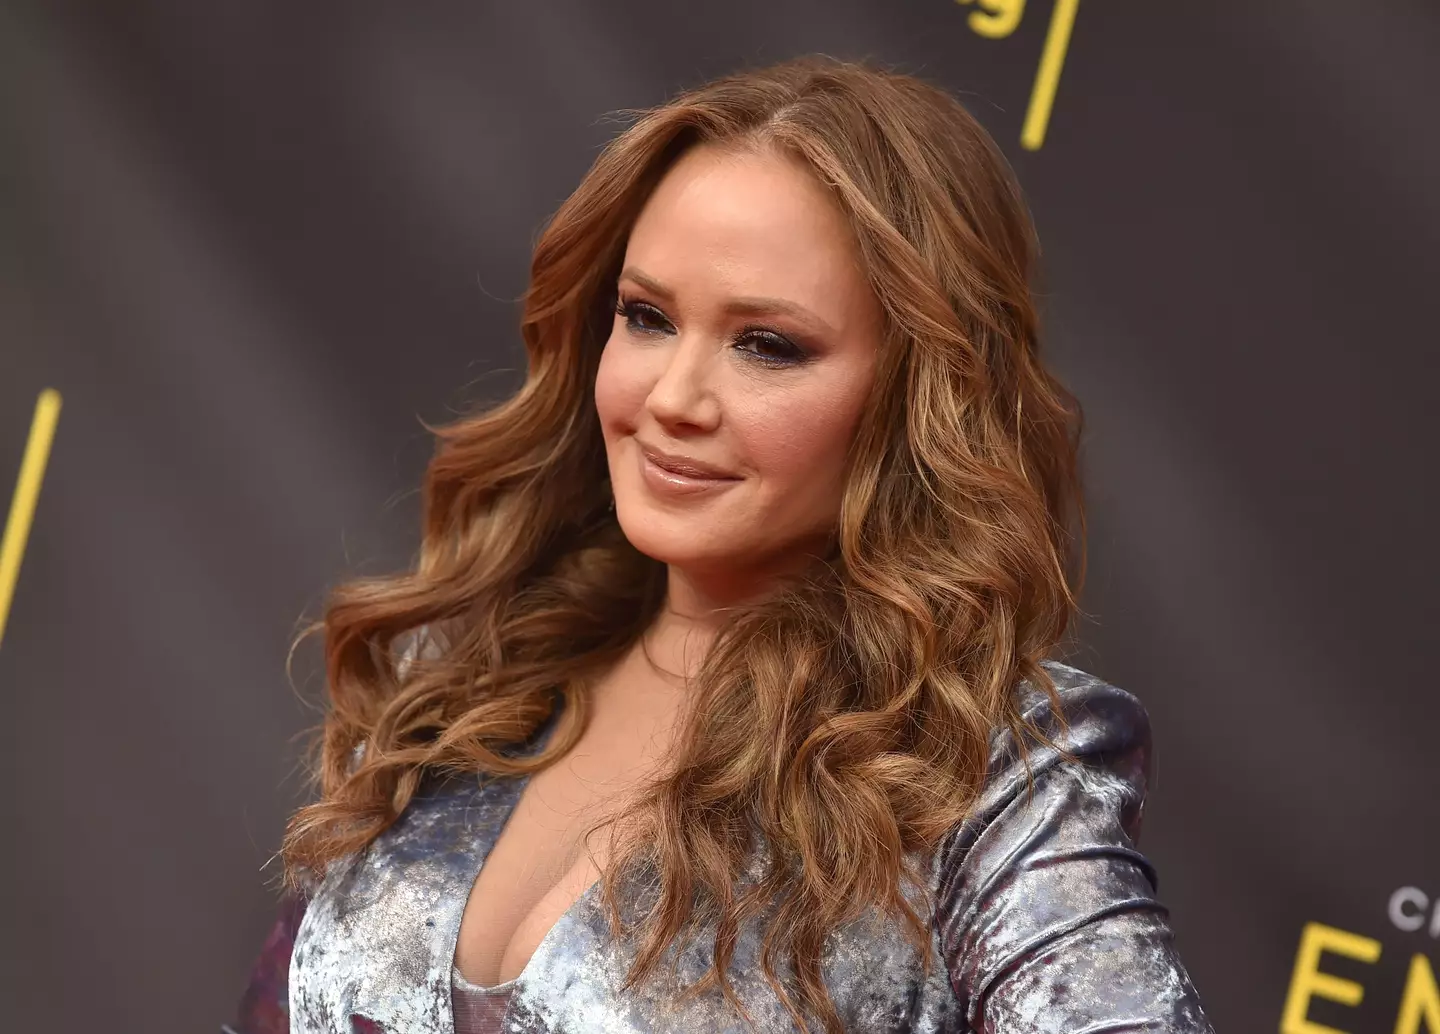 Leah Remini has opened up about completing her first semester at college.